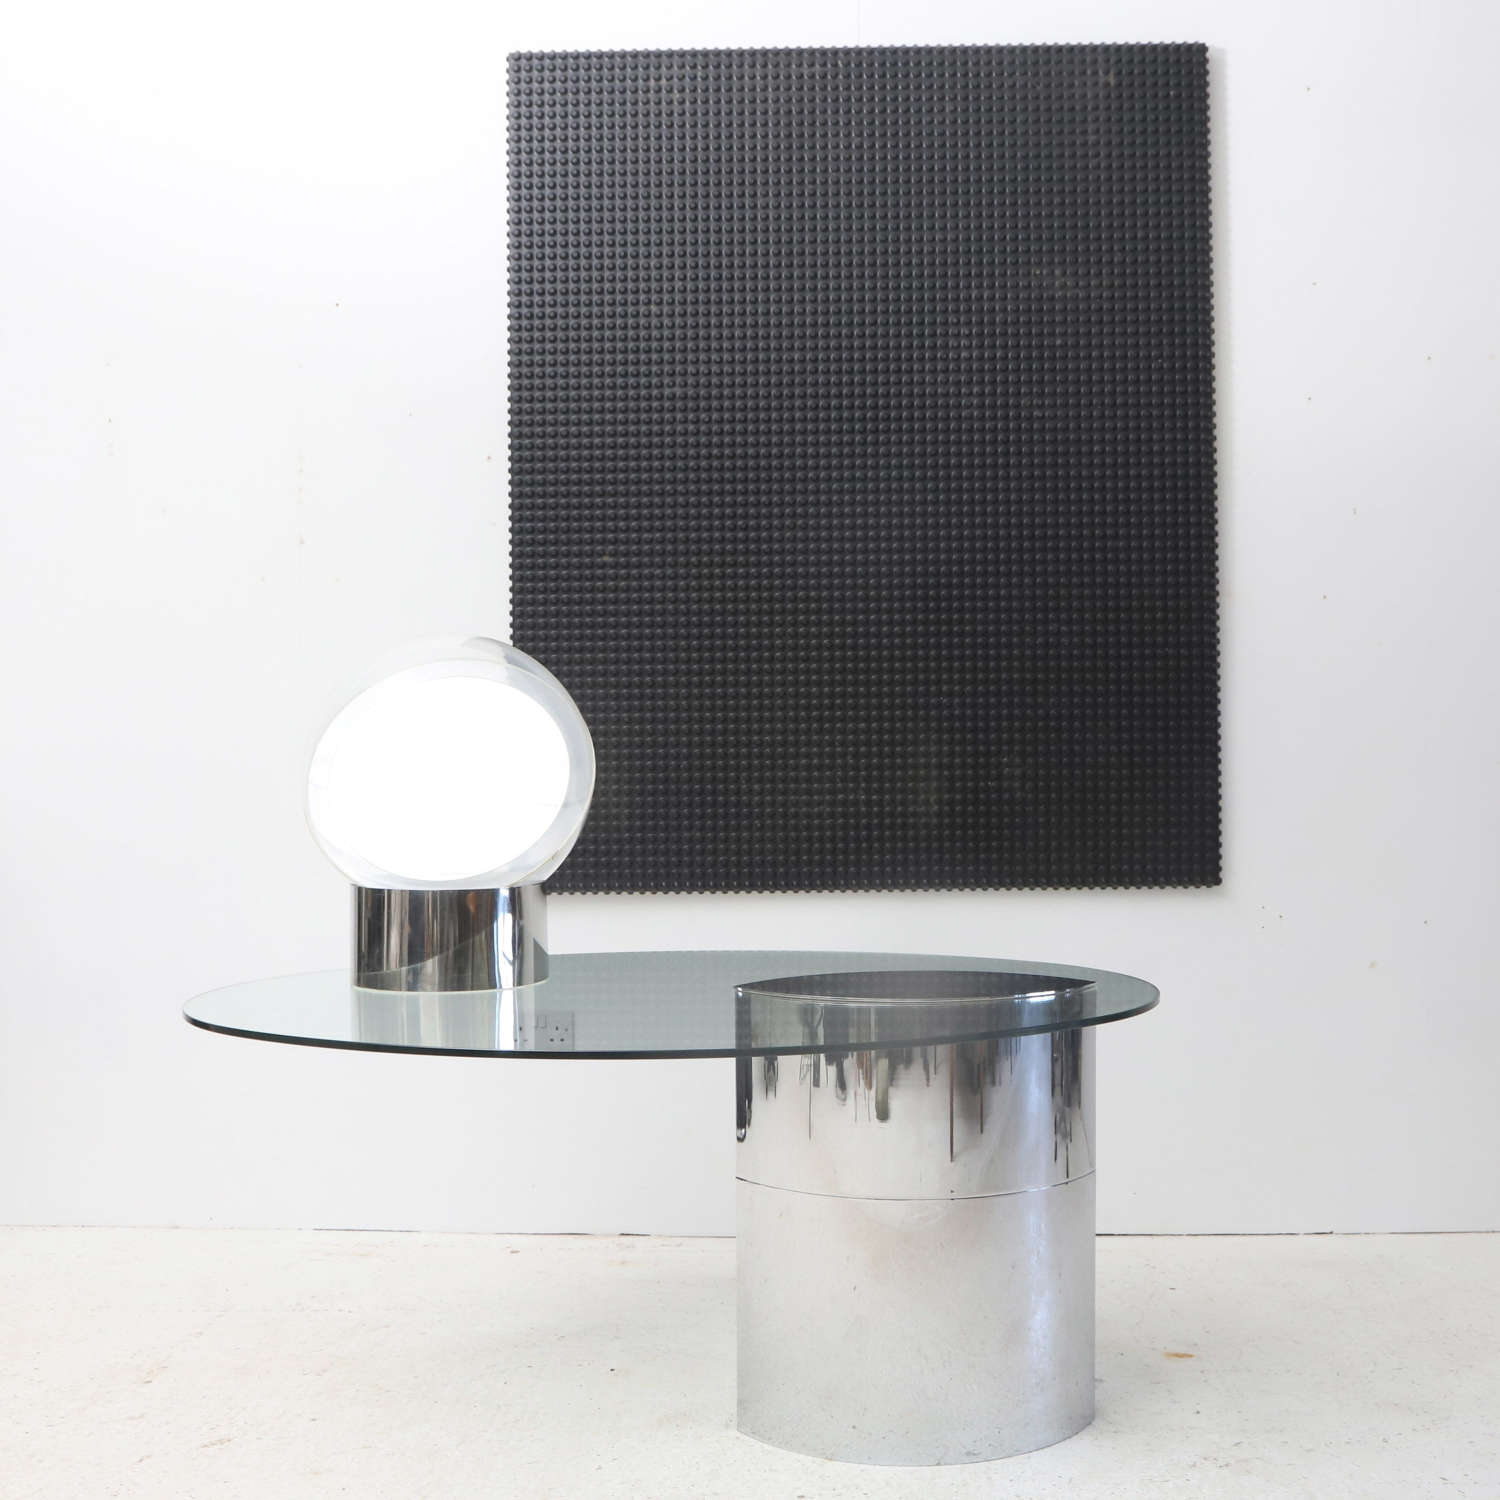 Cini Boeri Glass and Stainless Steel Table